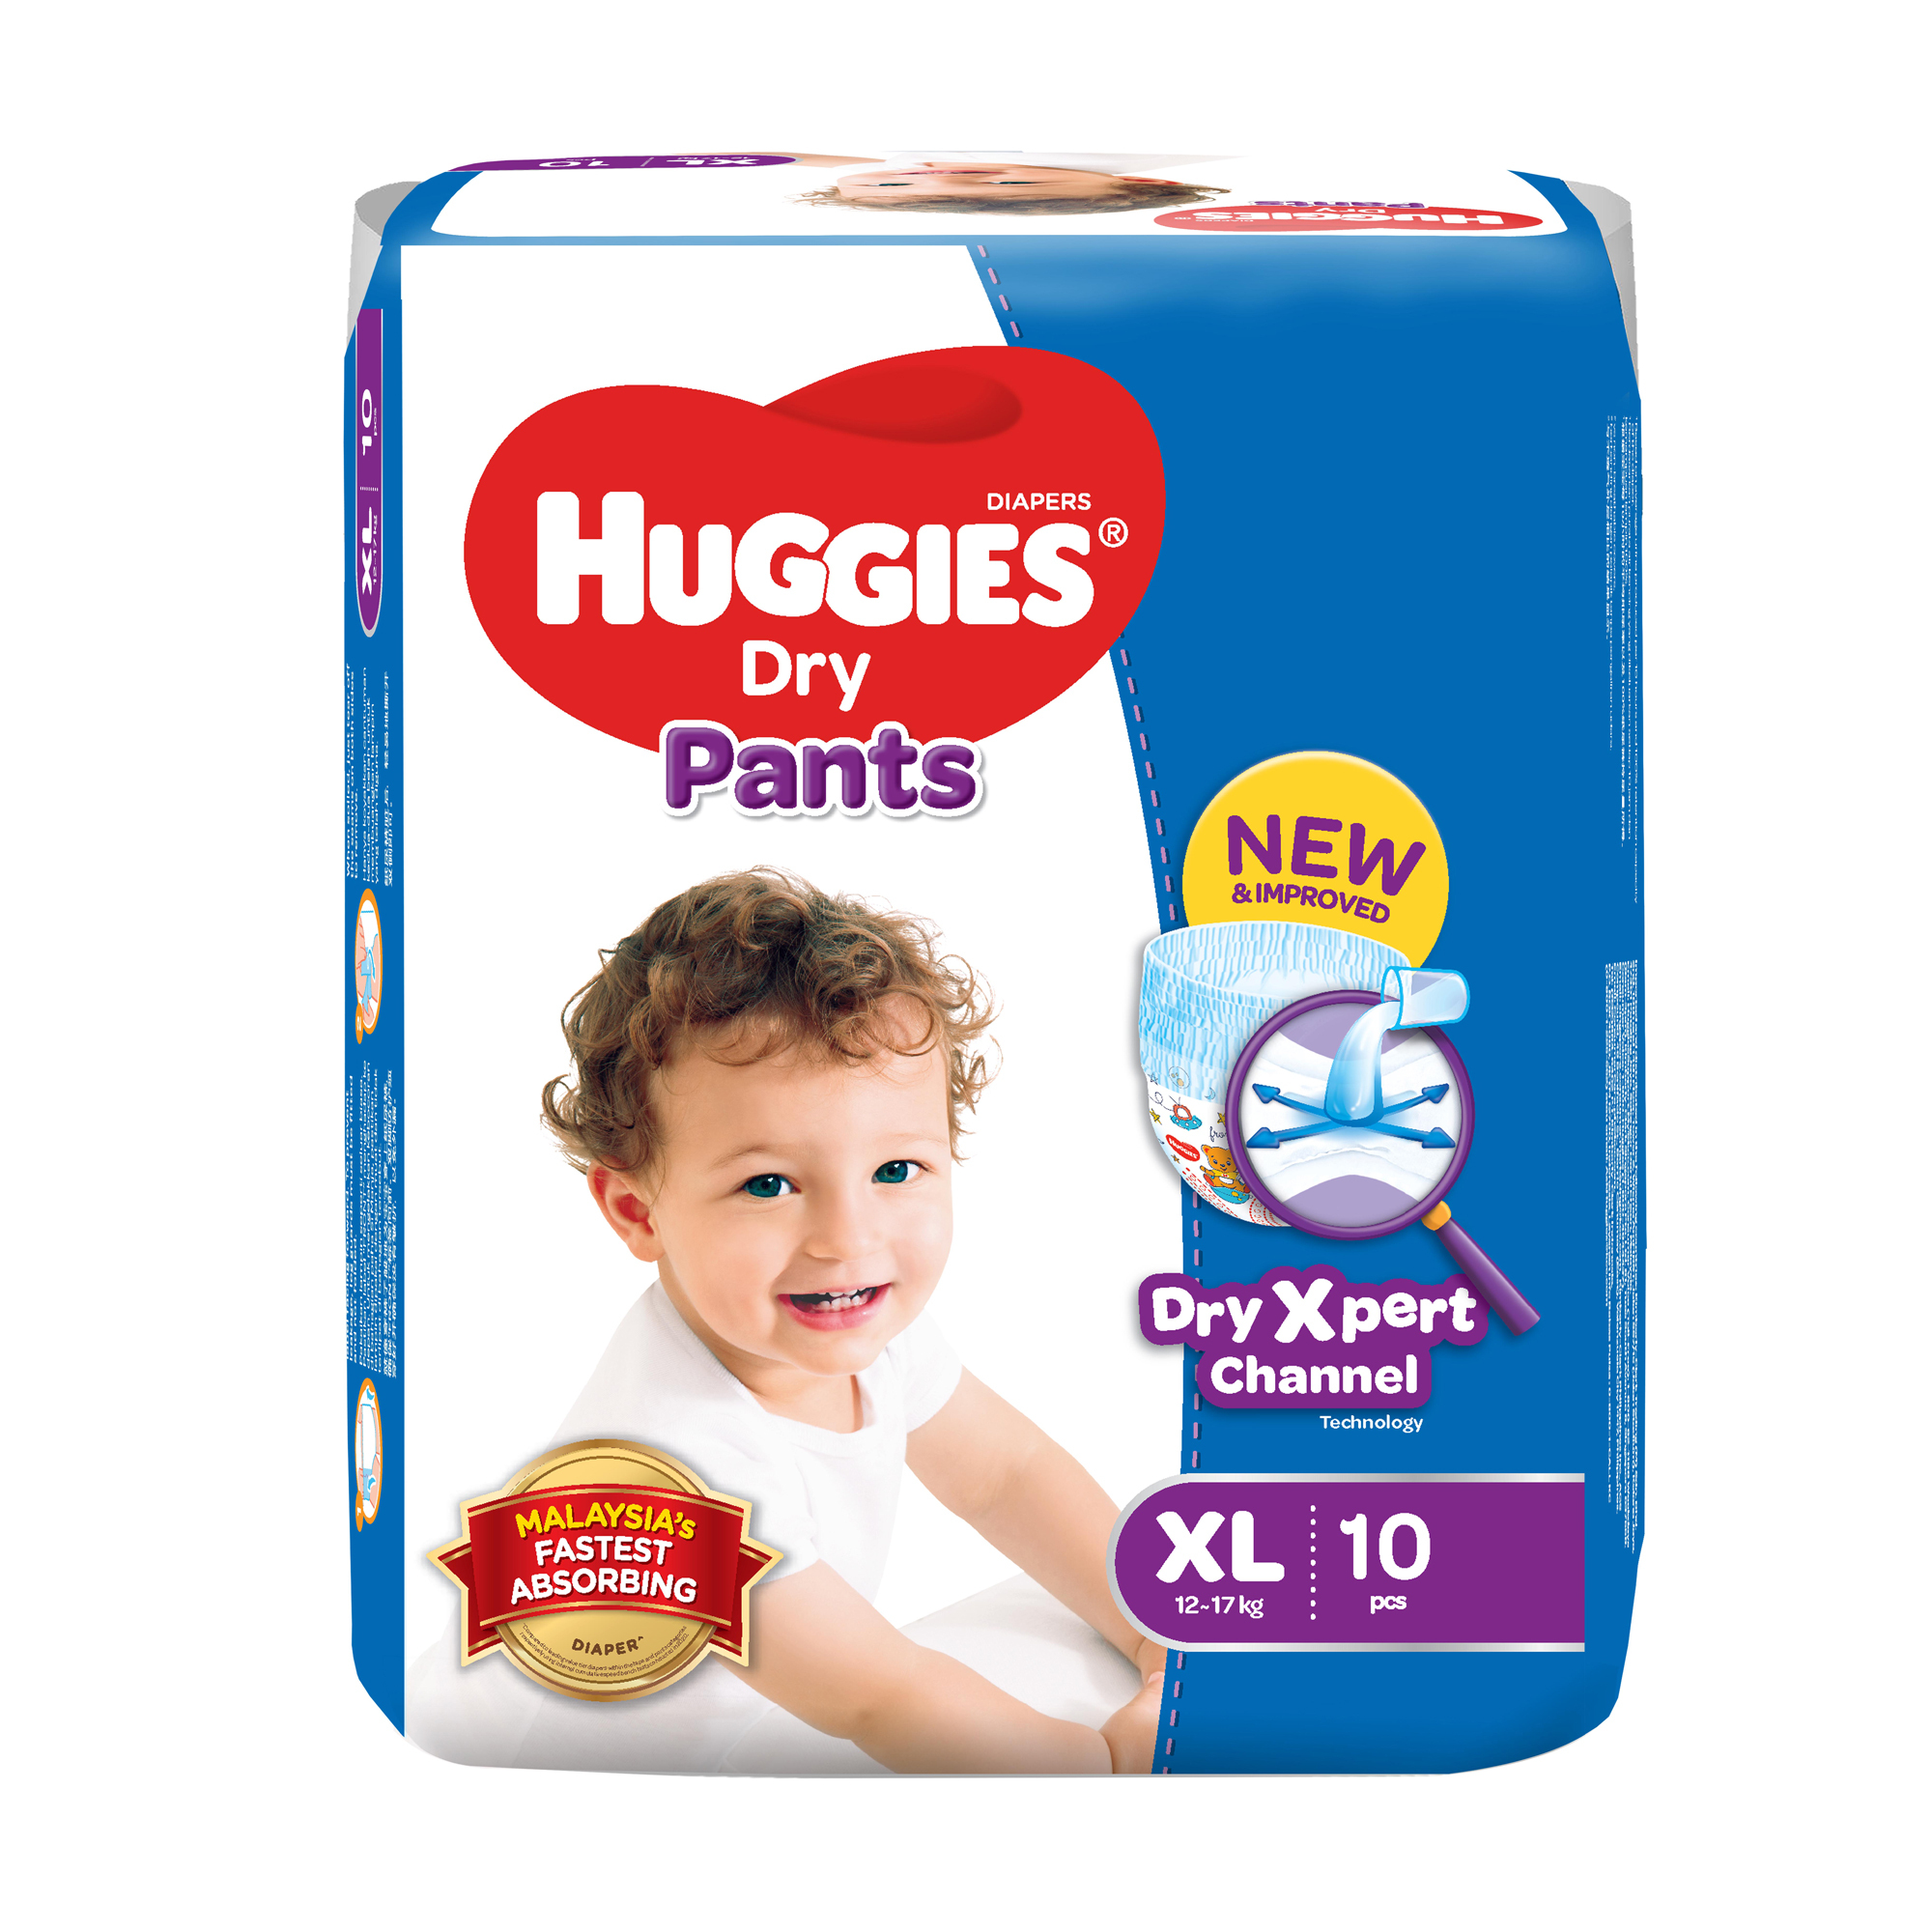 Buy Huggies Complete Comfort Wonder Pants, Double Extra Large (15-25kg)  Size, (24 count) with 5 in 1 Comfort Online at Low Prices in India -  Amazon.in